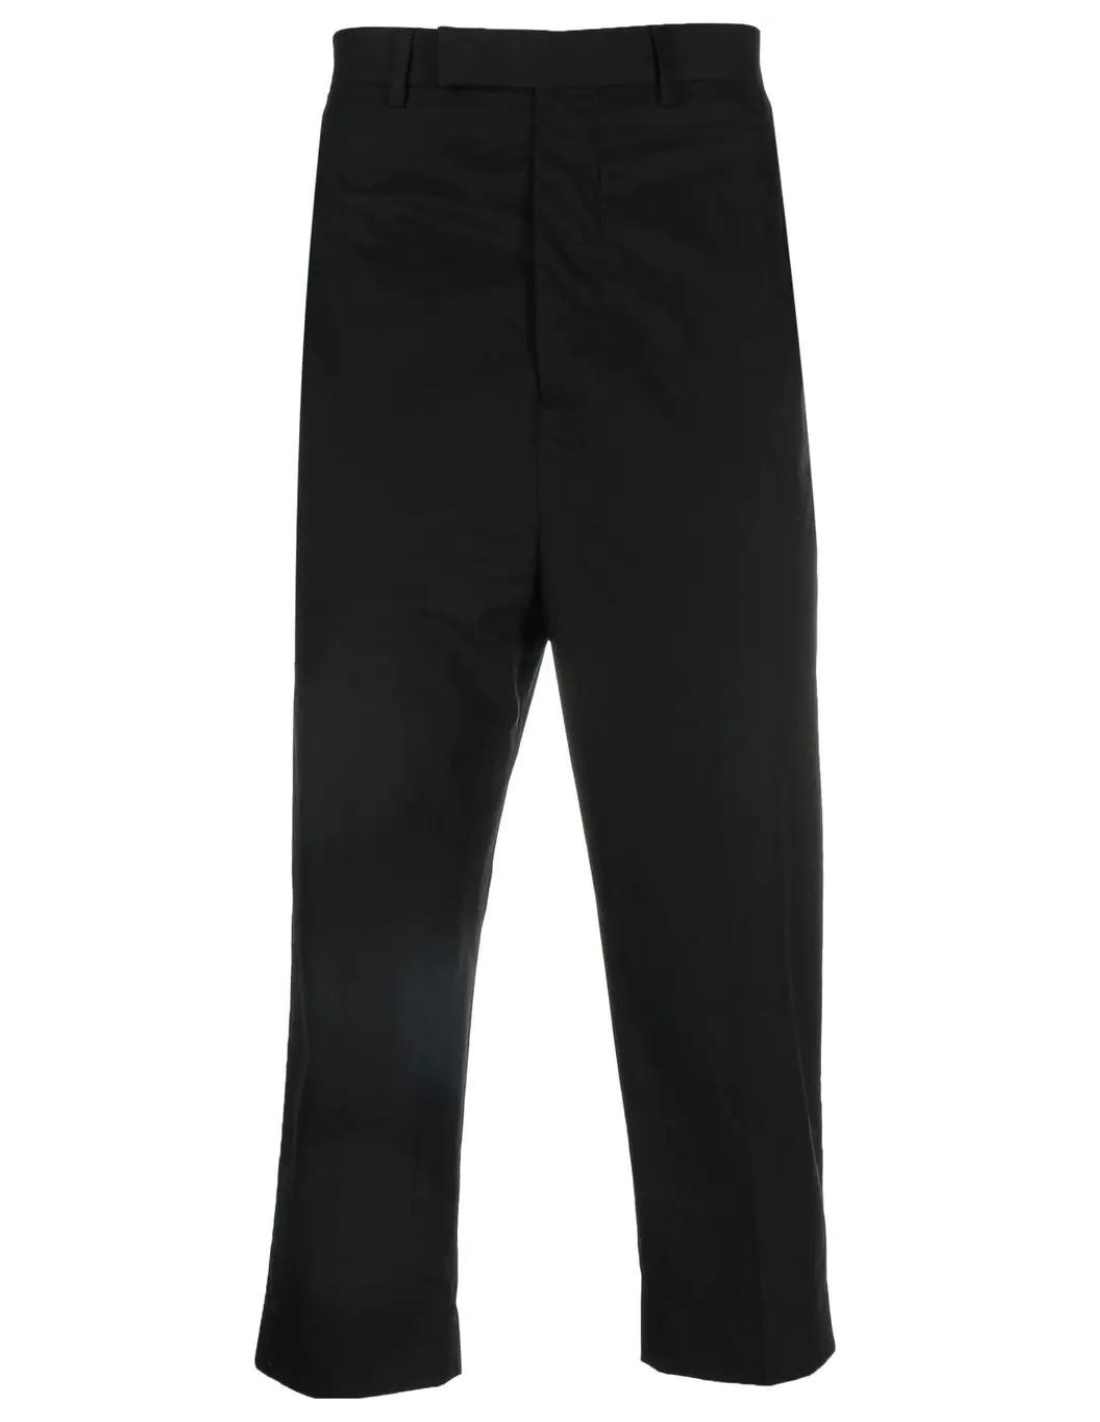 Rick Owens Astaires Cropped trousers | hartwellspremium.com